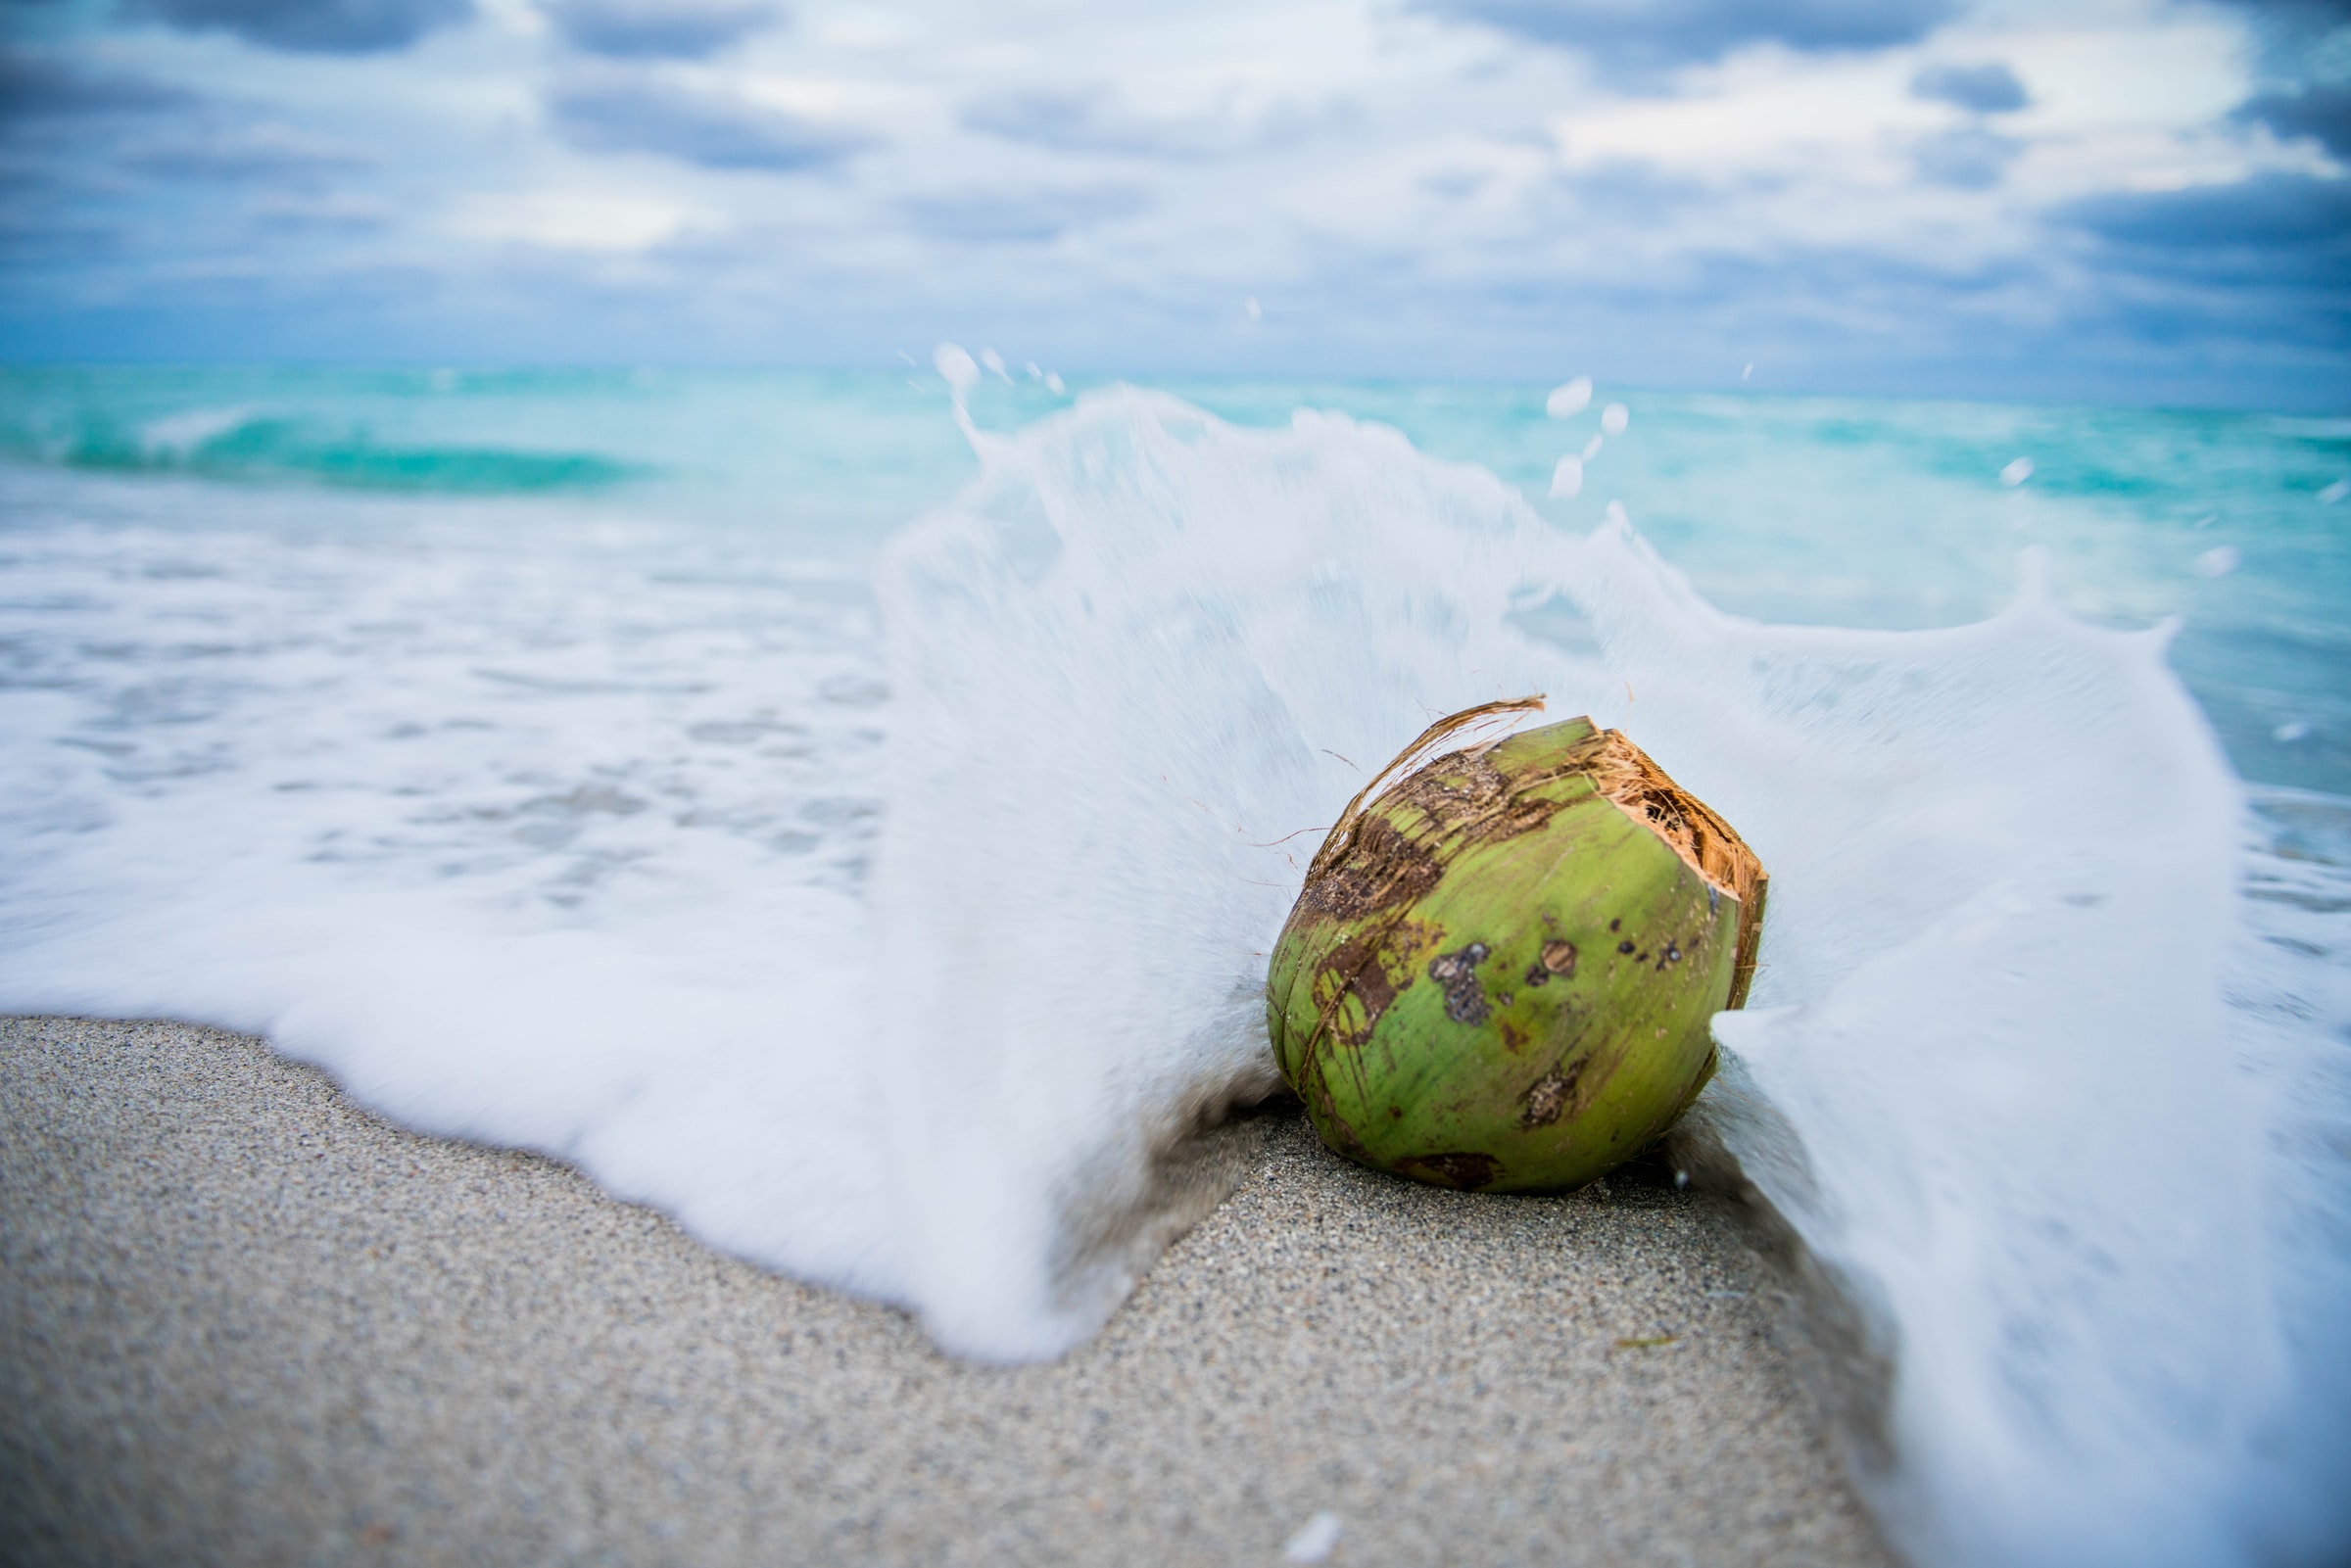 Best Beauty Uses for Coconut Oil the Tropic Island Gods Would Approve